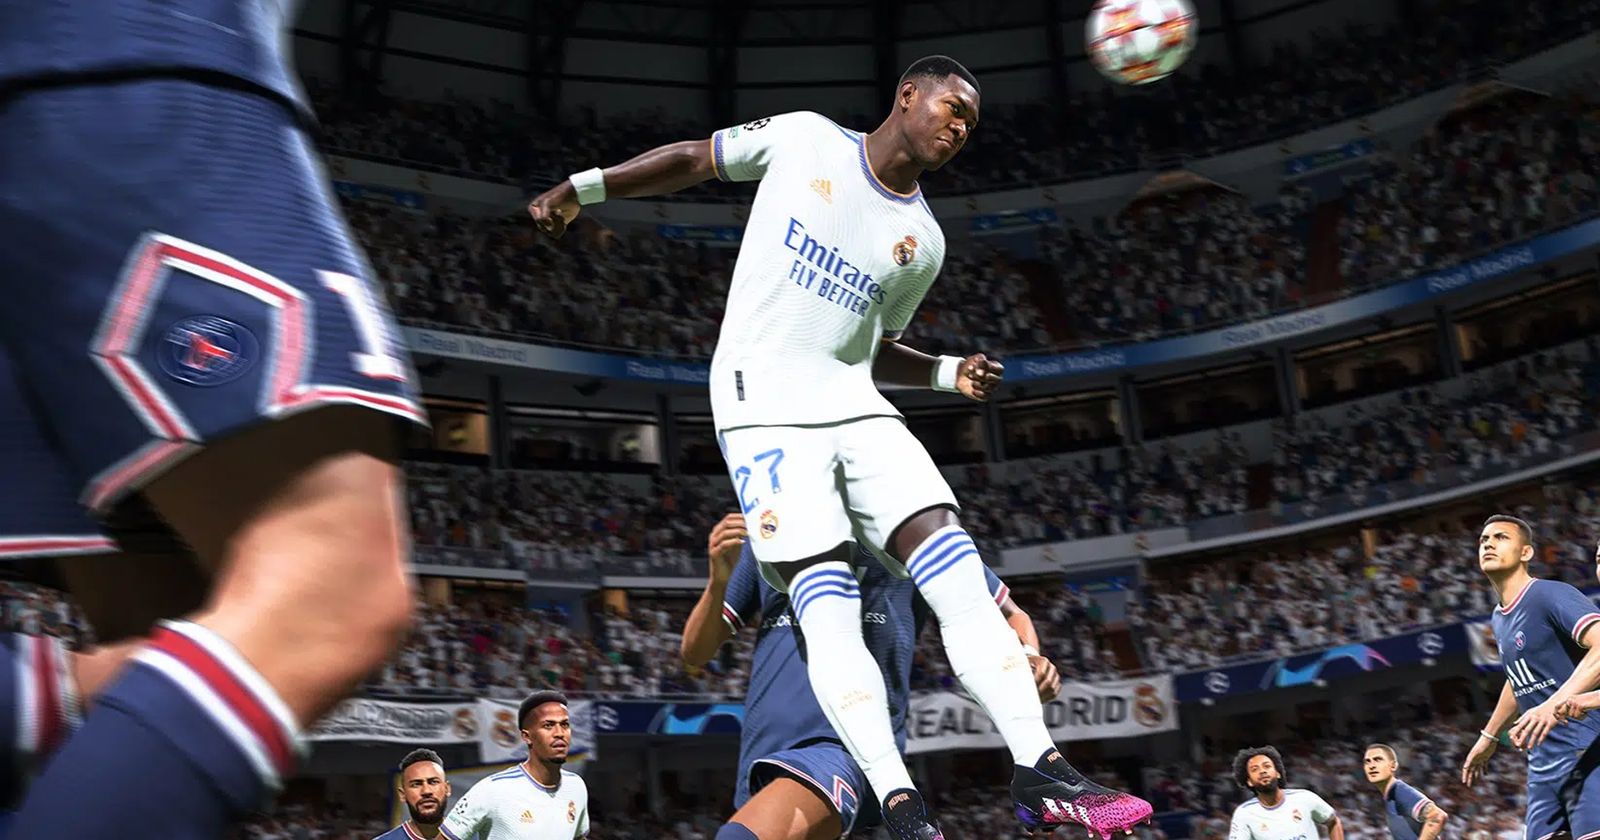 FIFA 23 Web App and Companion App release date revealed